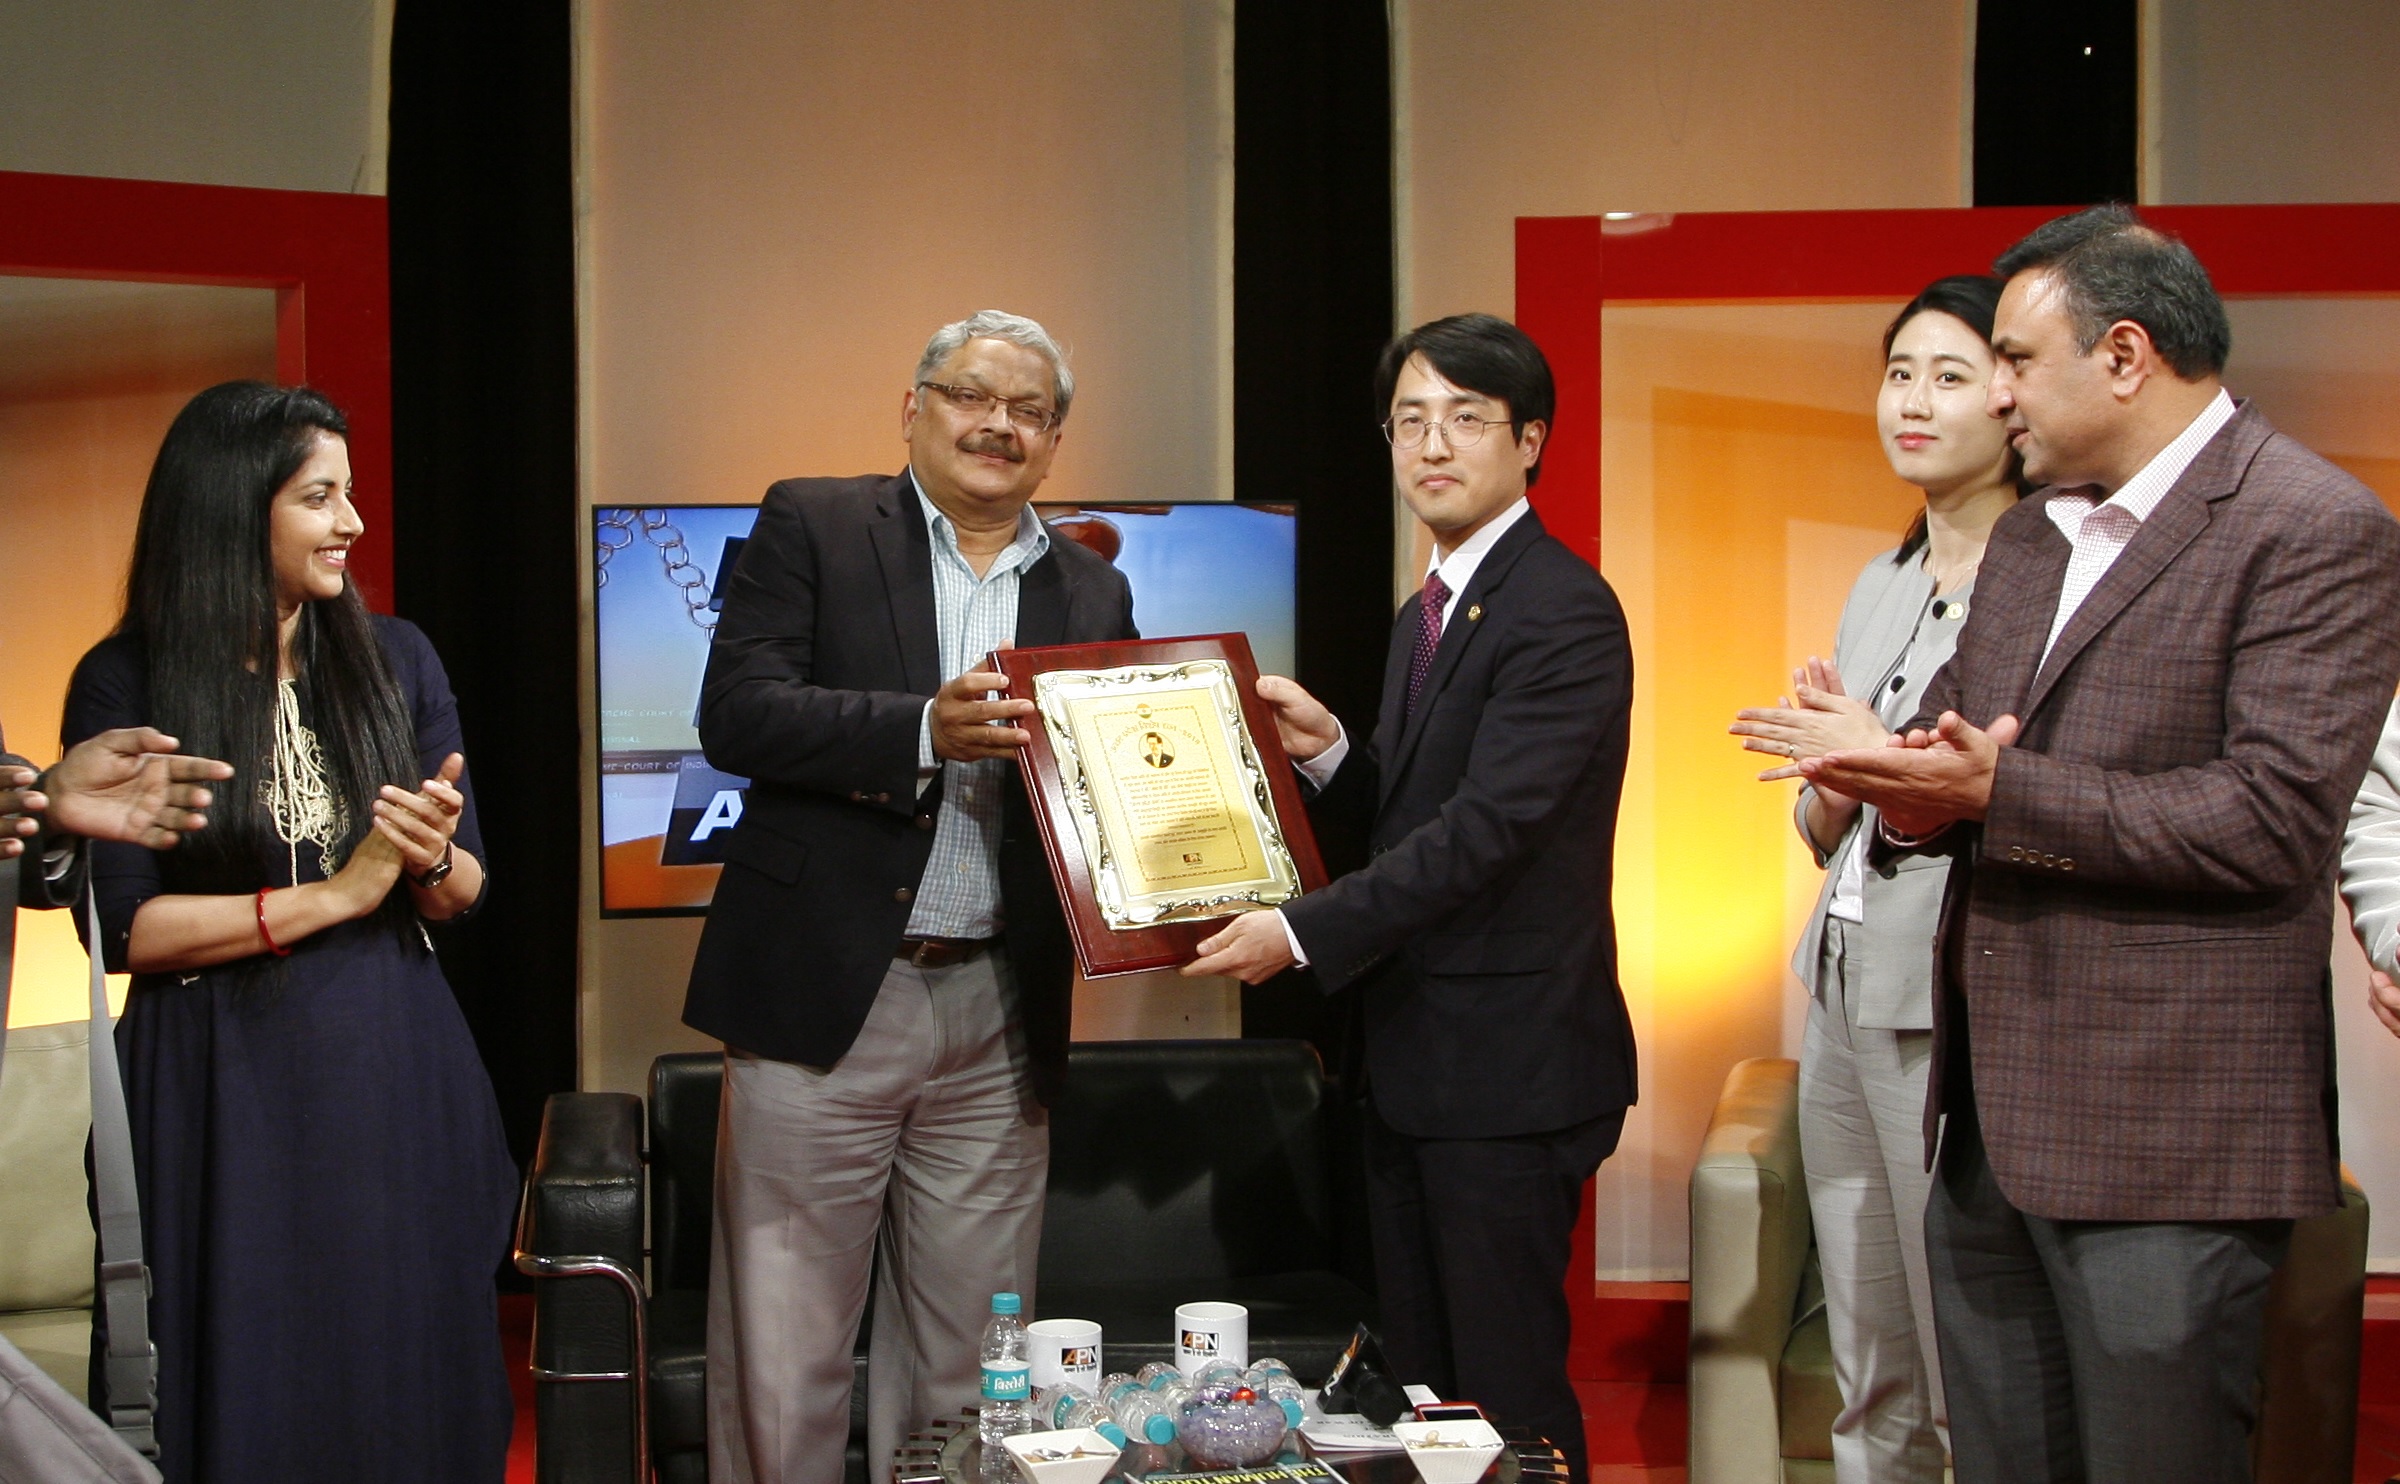 Man Lee Hee – man fighting for global peace honored with UP Ratna